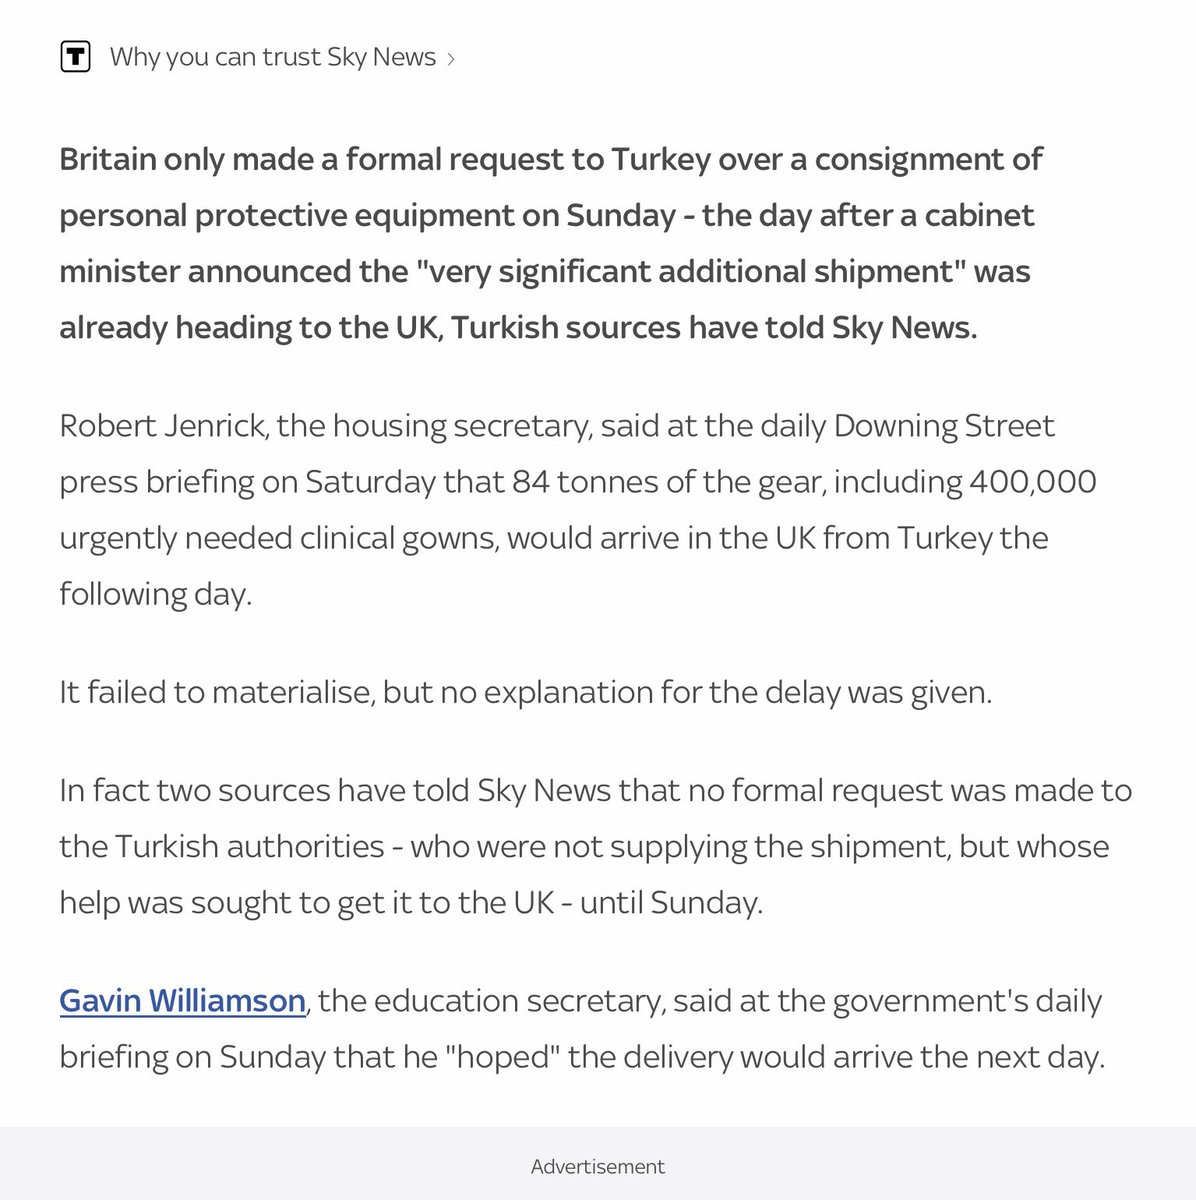 On Saturday at the Press Briefing Eobert Jenrick said that 84 tonnes of PPE including 400k gowns were already heading to the U.K. from Turkey and they would arrive on Sunday.Gavin Williamson said on the Sunday Briefing that he hoped it would arrive on Monday.